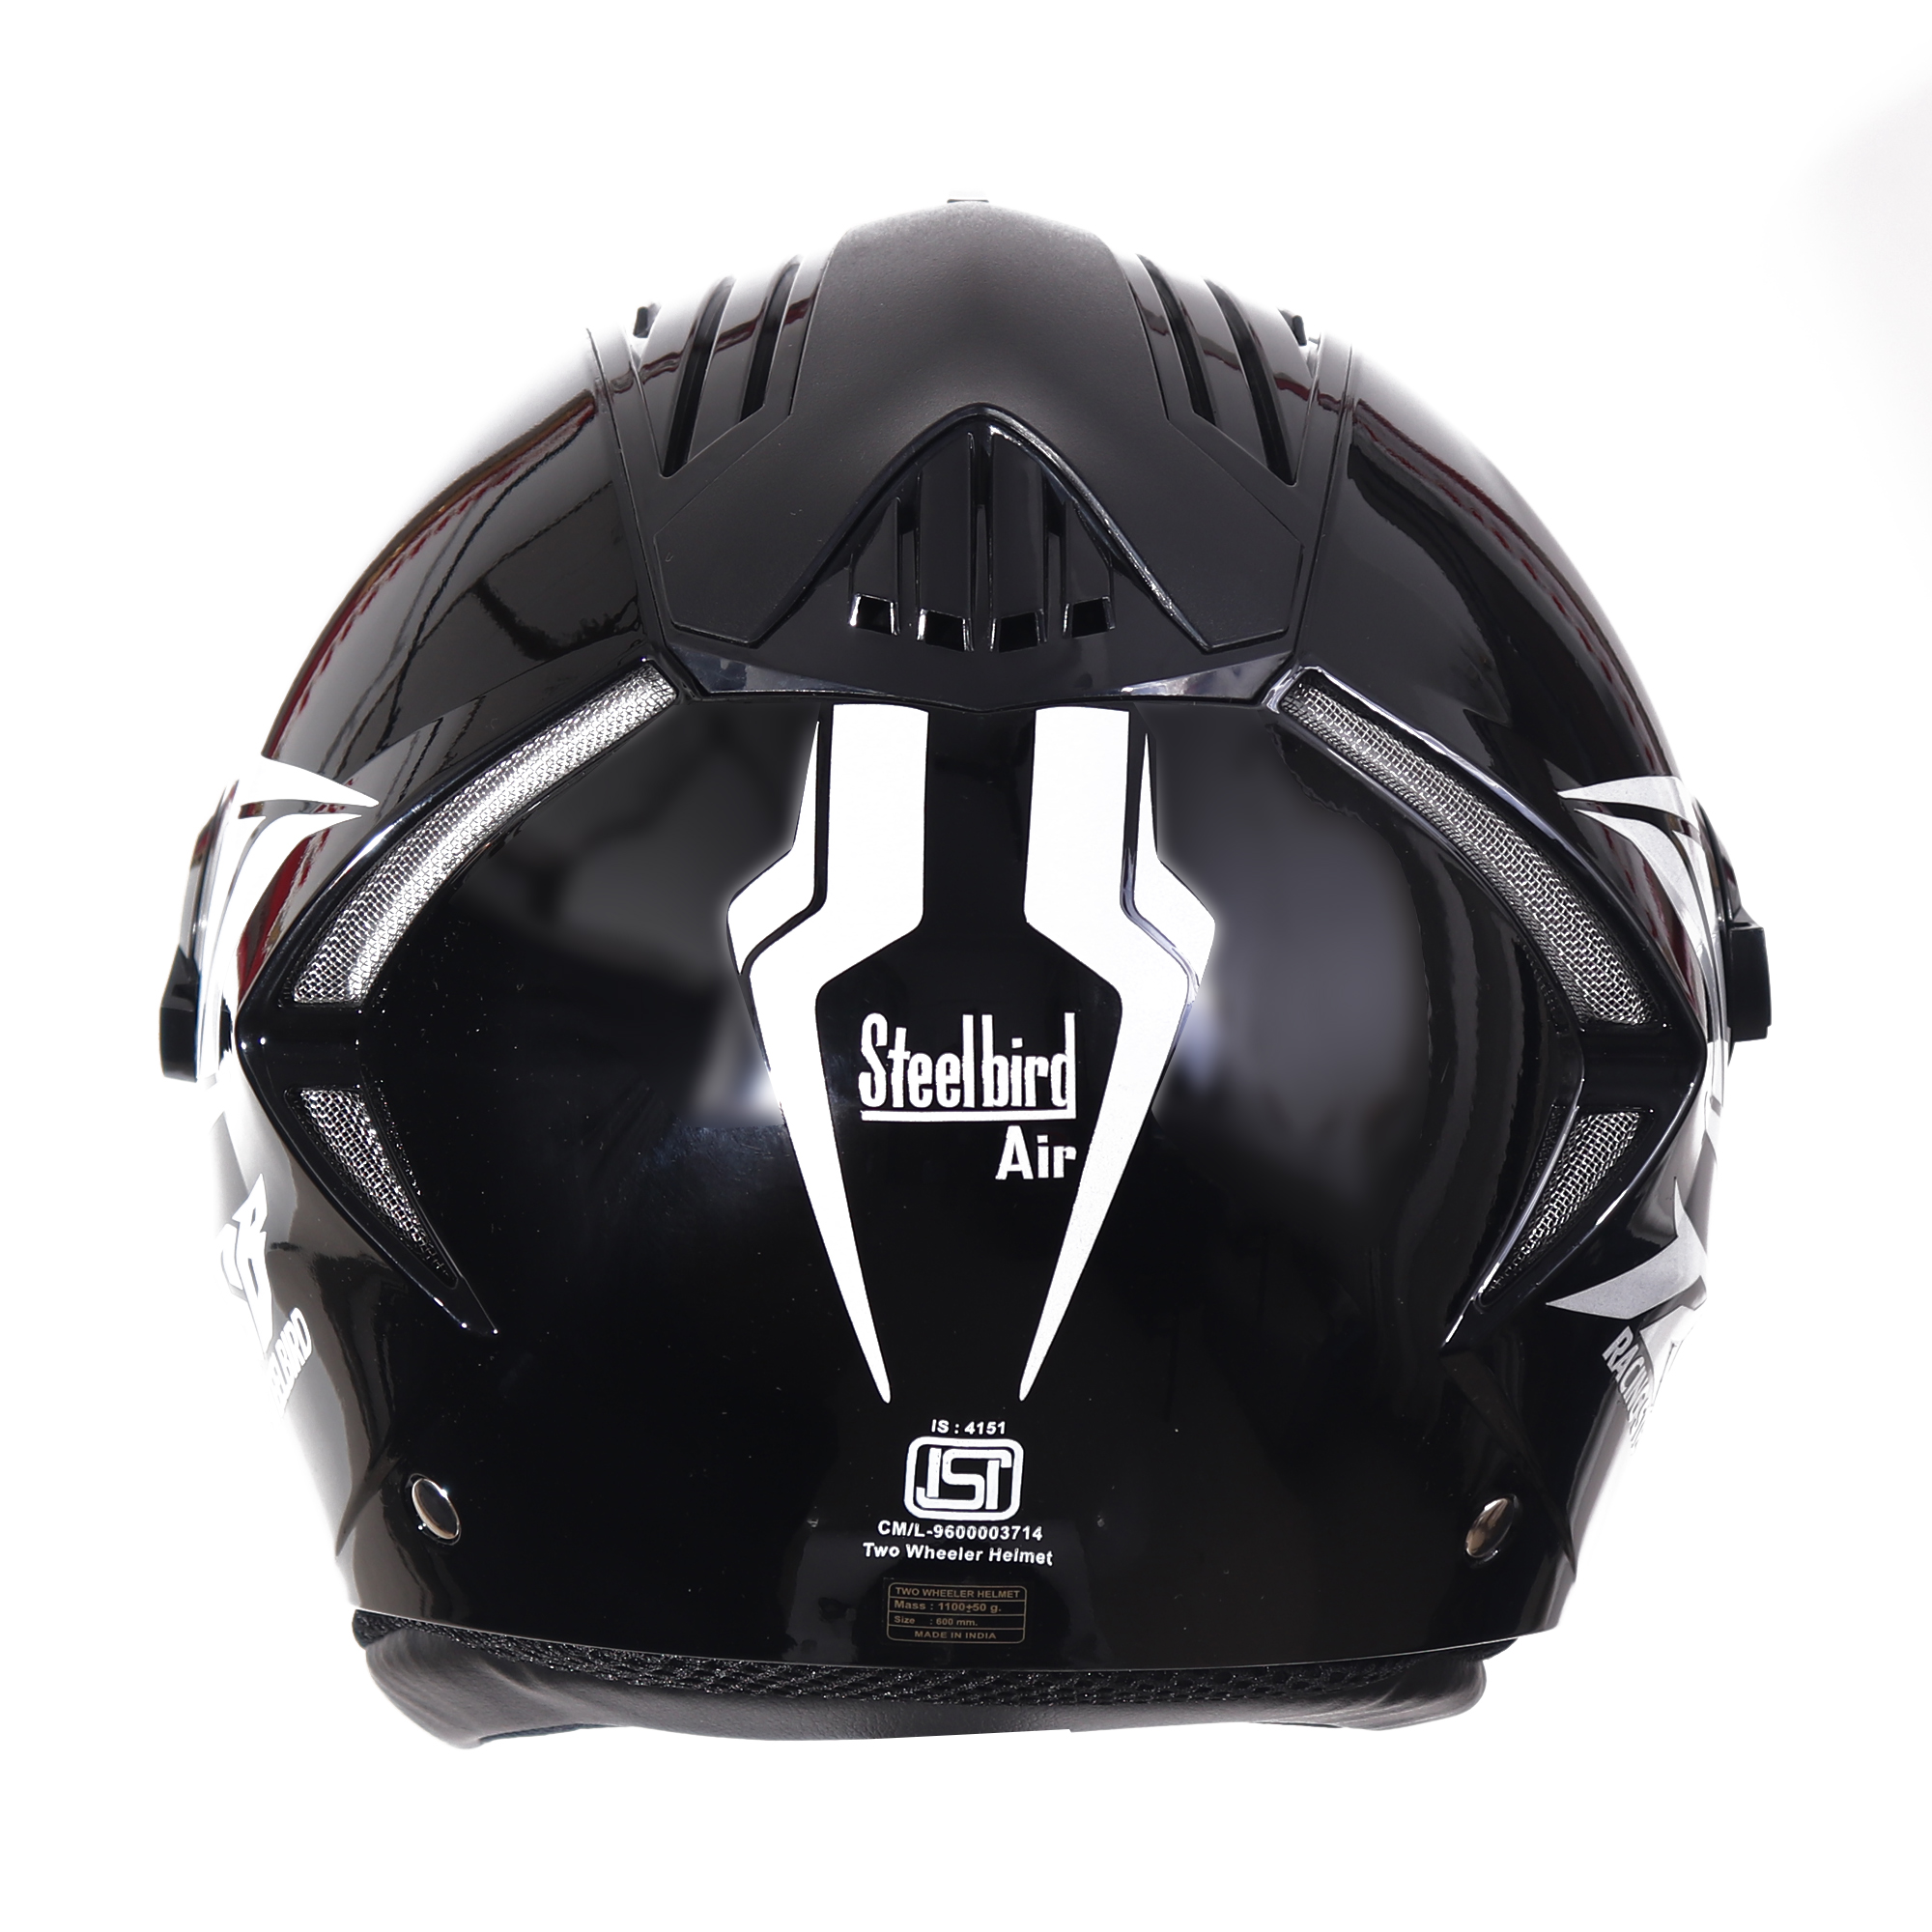 SBA-2 Moon Glossy Black With White ) Fitted With Clear Visor Extra Rainbow Night Vision Visor Free)